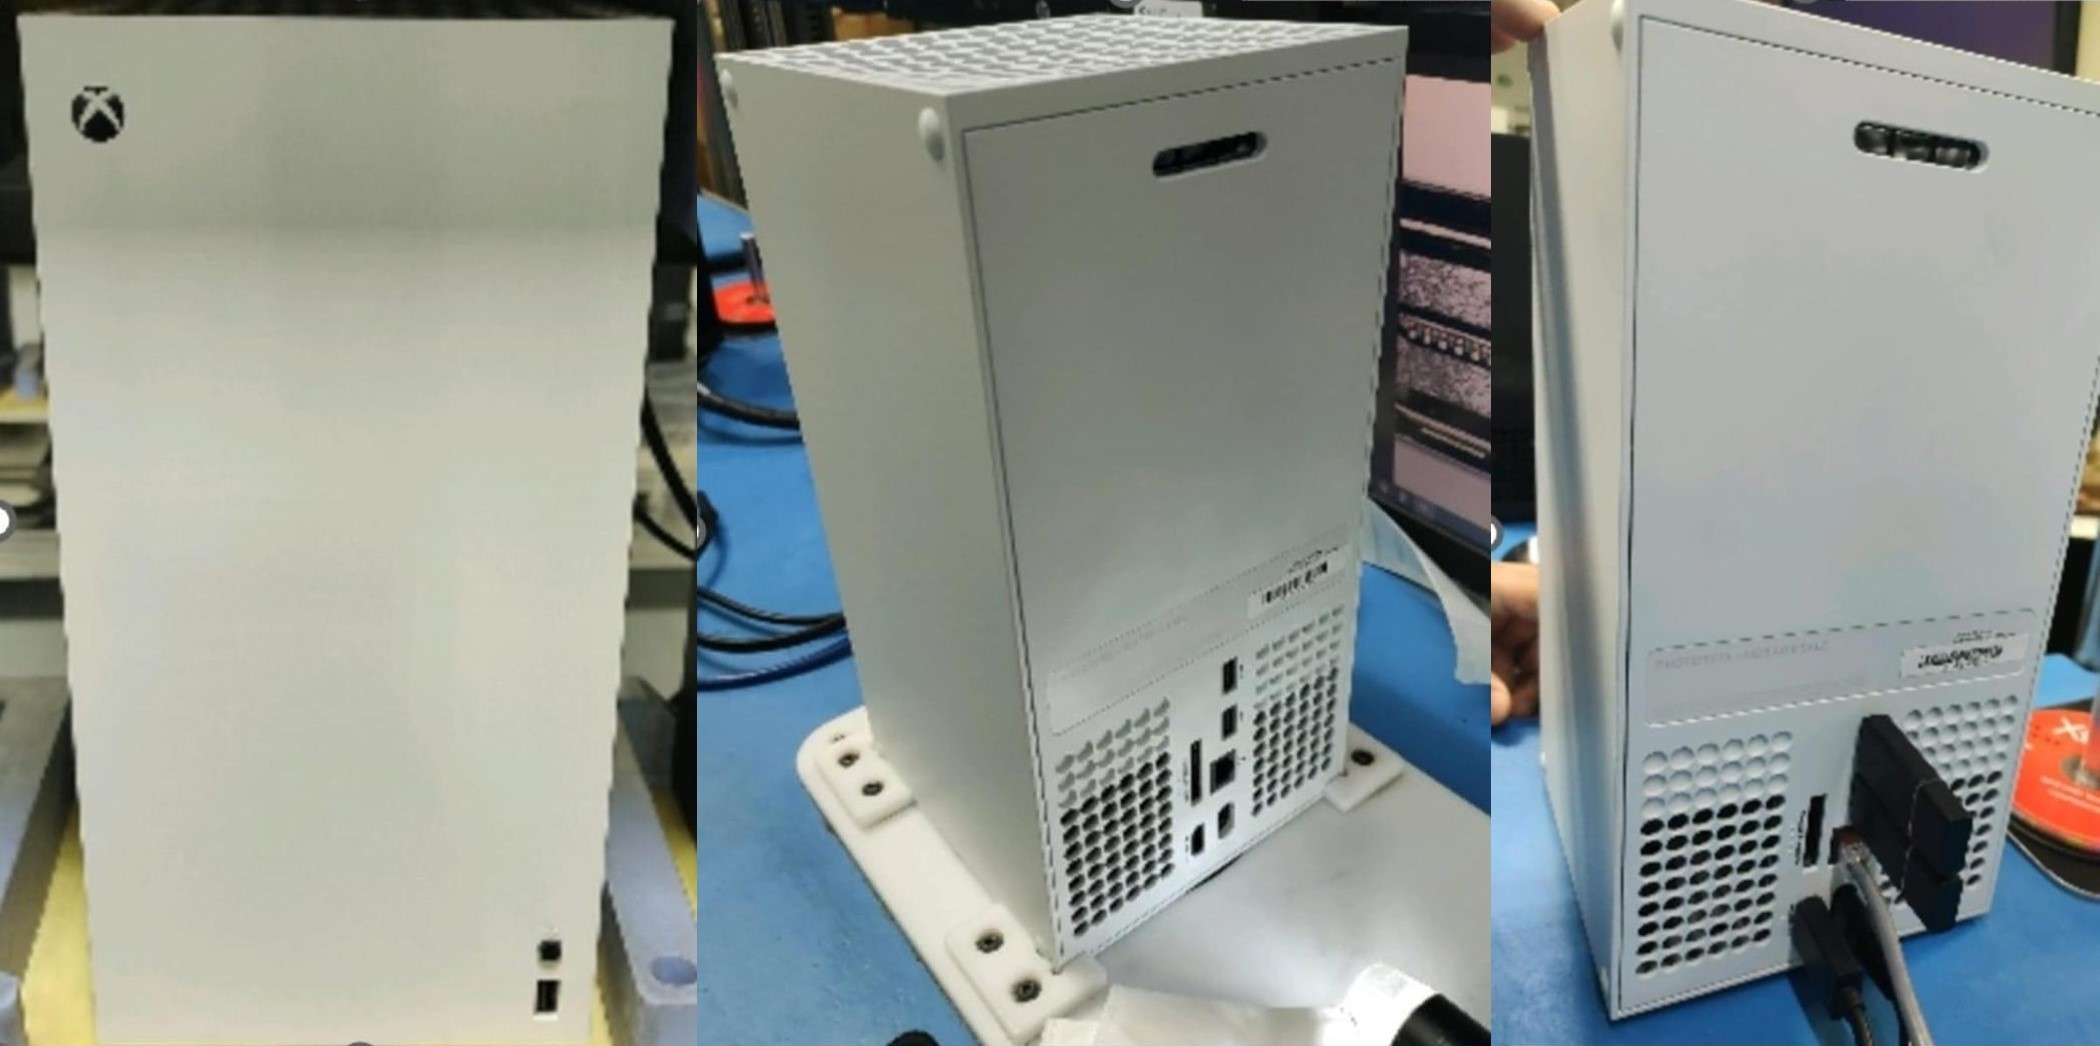 Series X white Pictures from a white Xbox Series X without optical drive have been leaked | VGLeaks 2.0